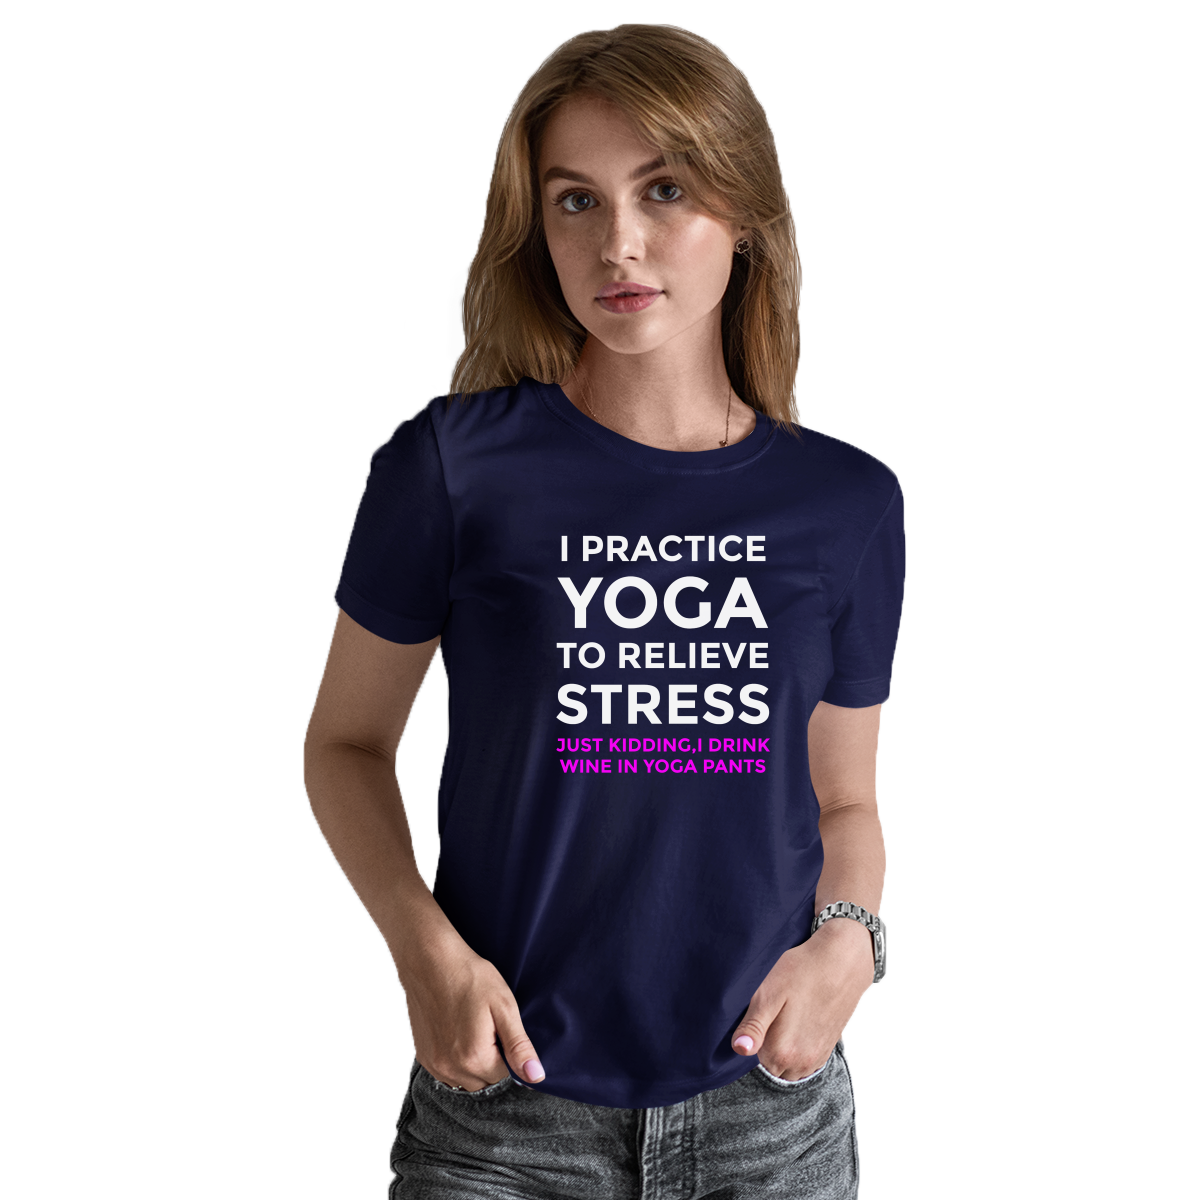 I practice yoga to relieve stress, just kidding I drink wine in yoga pants Women's T-shirt | Navy